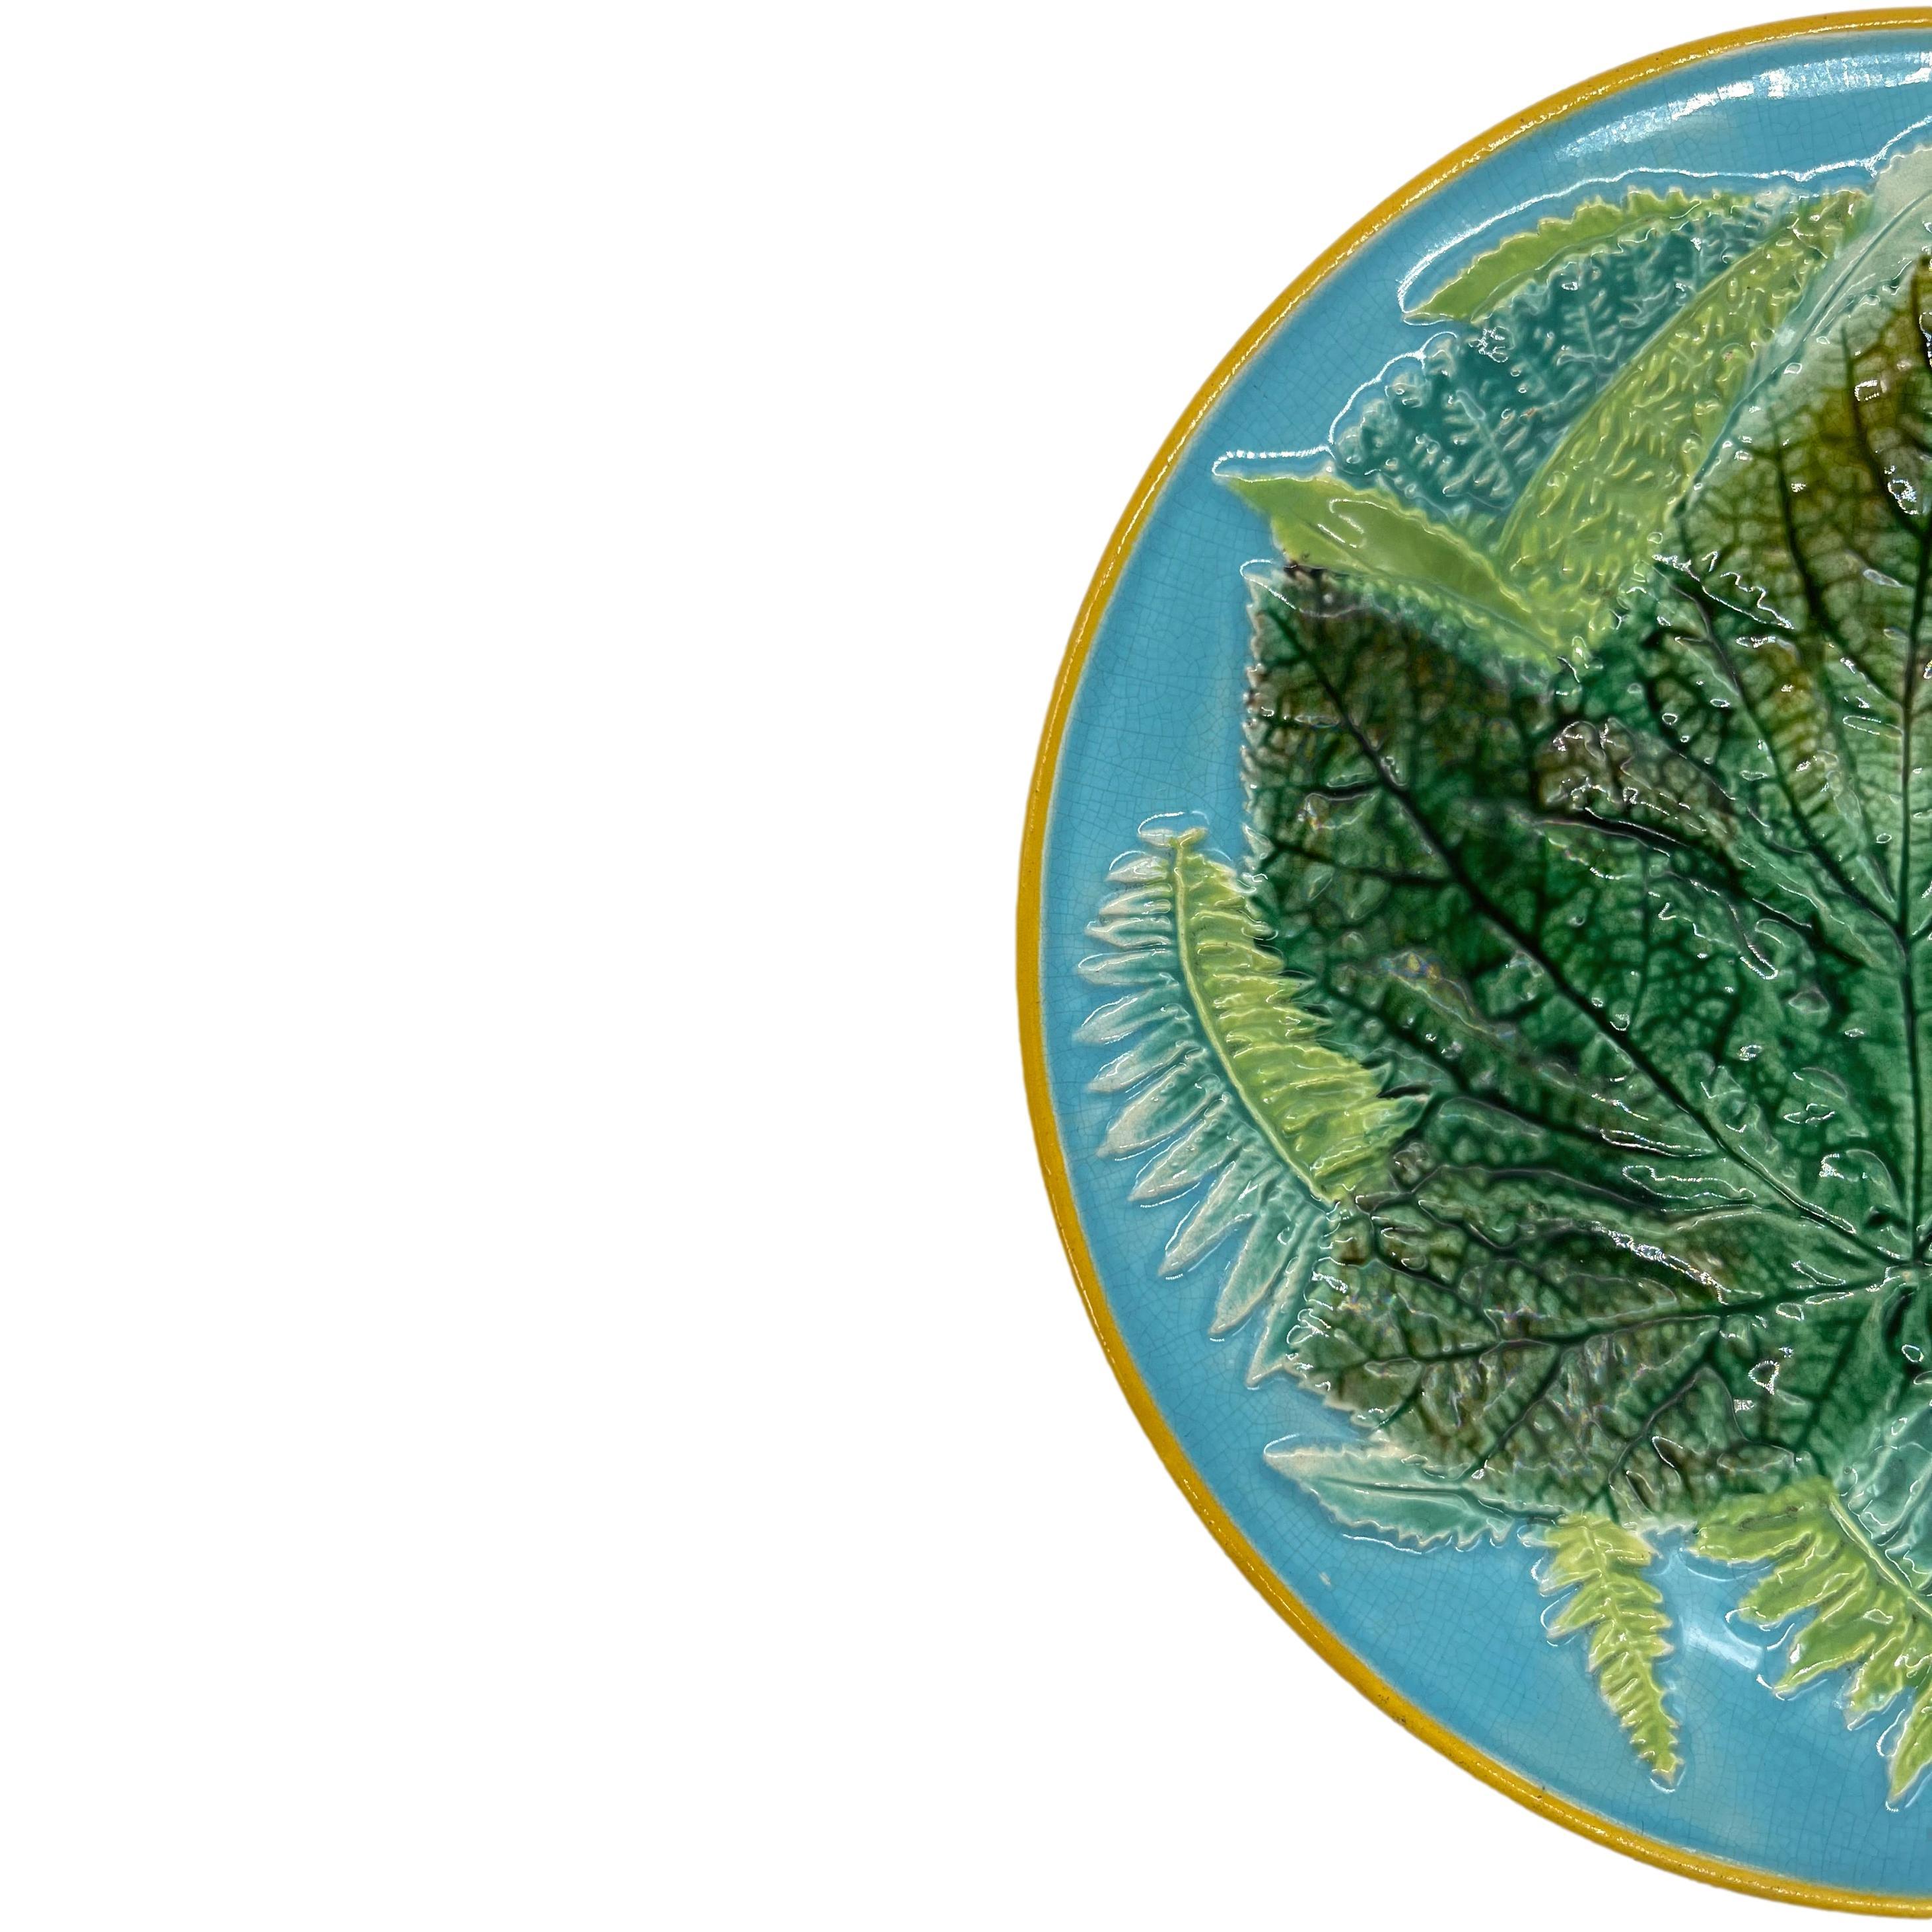 George Jones Majolica Maple Leaf and Ferns Plat, English, ca. 1873, the relief molded dish with a central green-glazed maple leaf with ferns on a turquoise ground, the rim banded in ochre, the reverse with painted design number '2584,' which